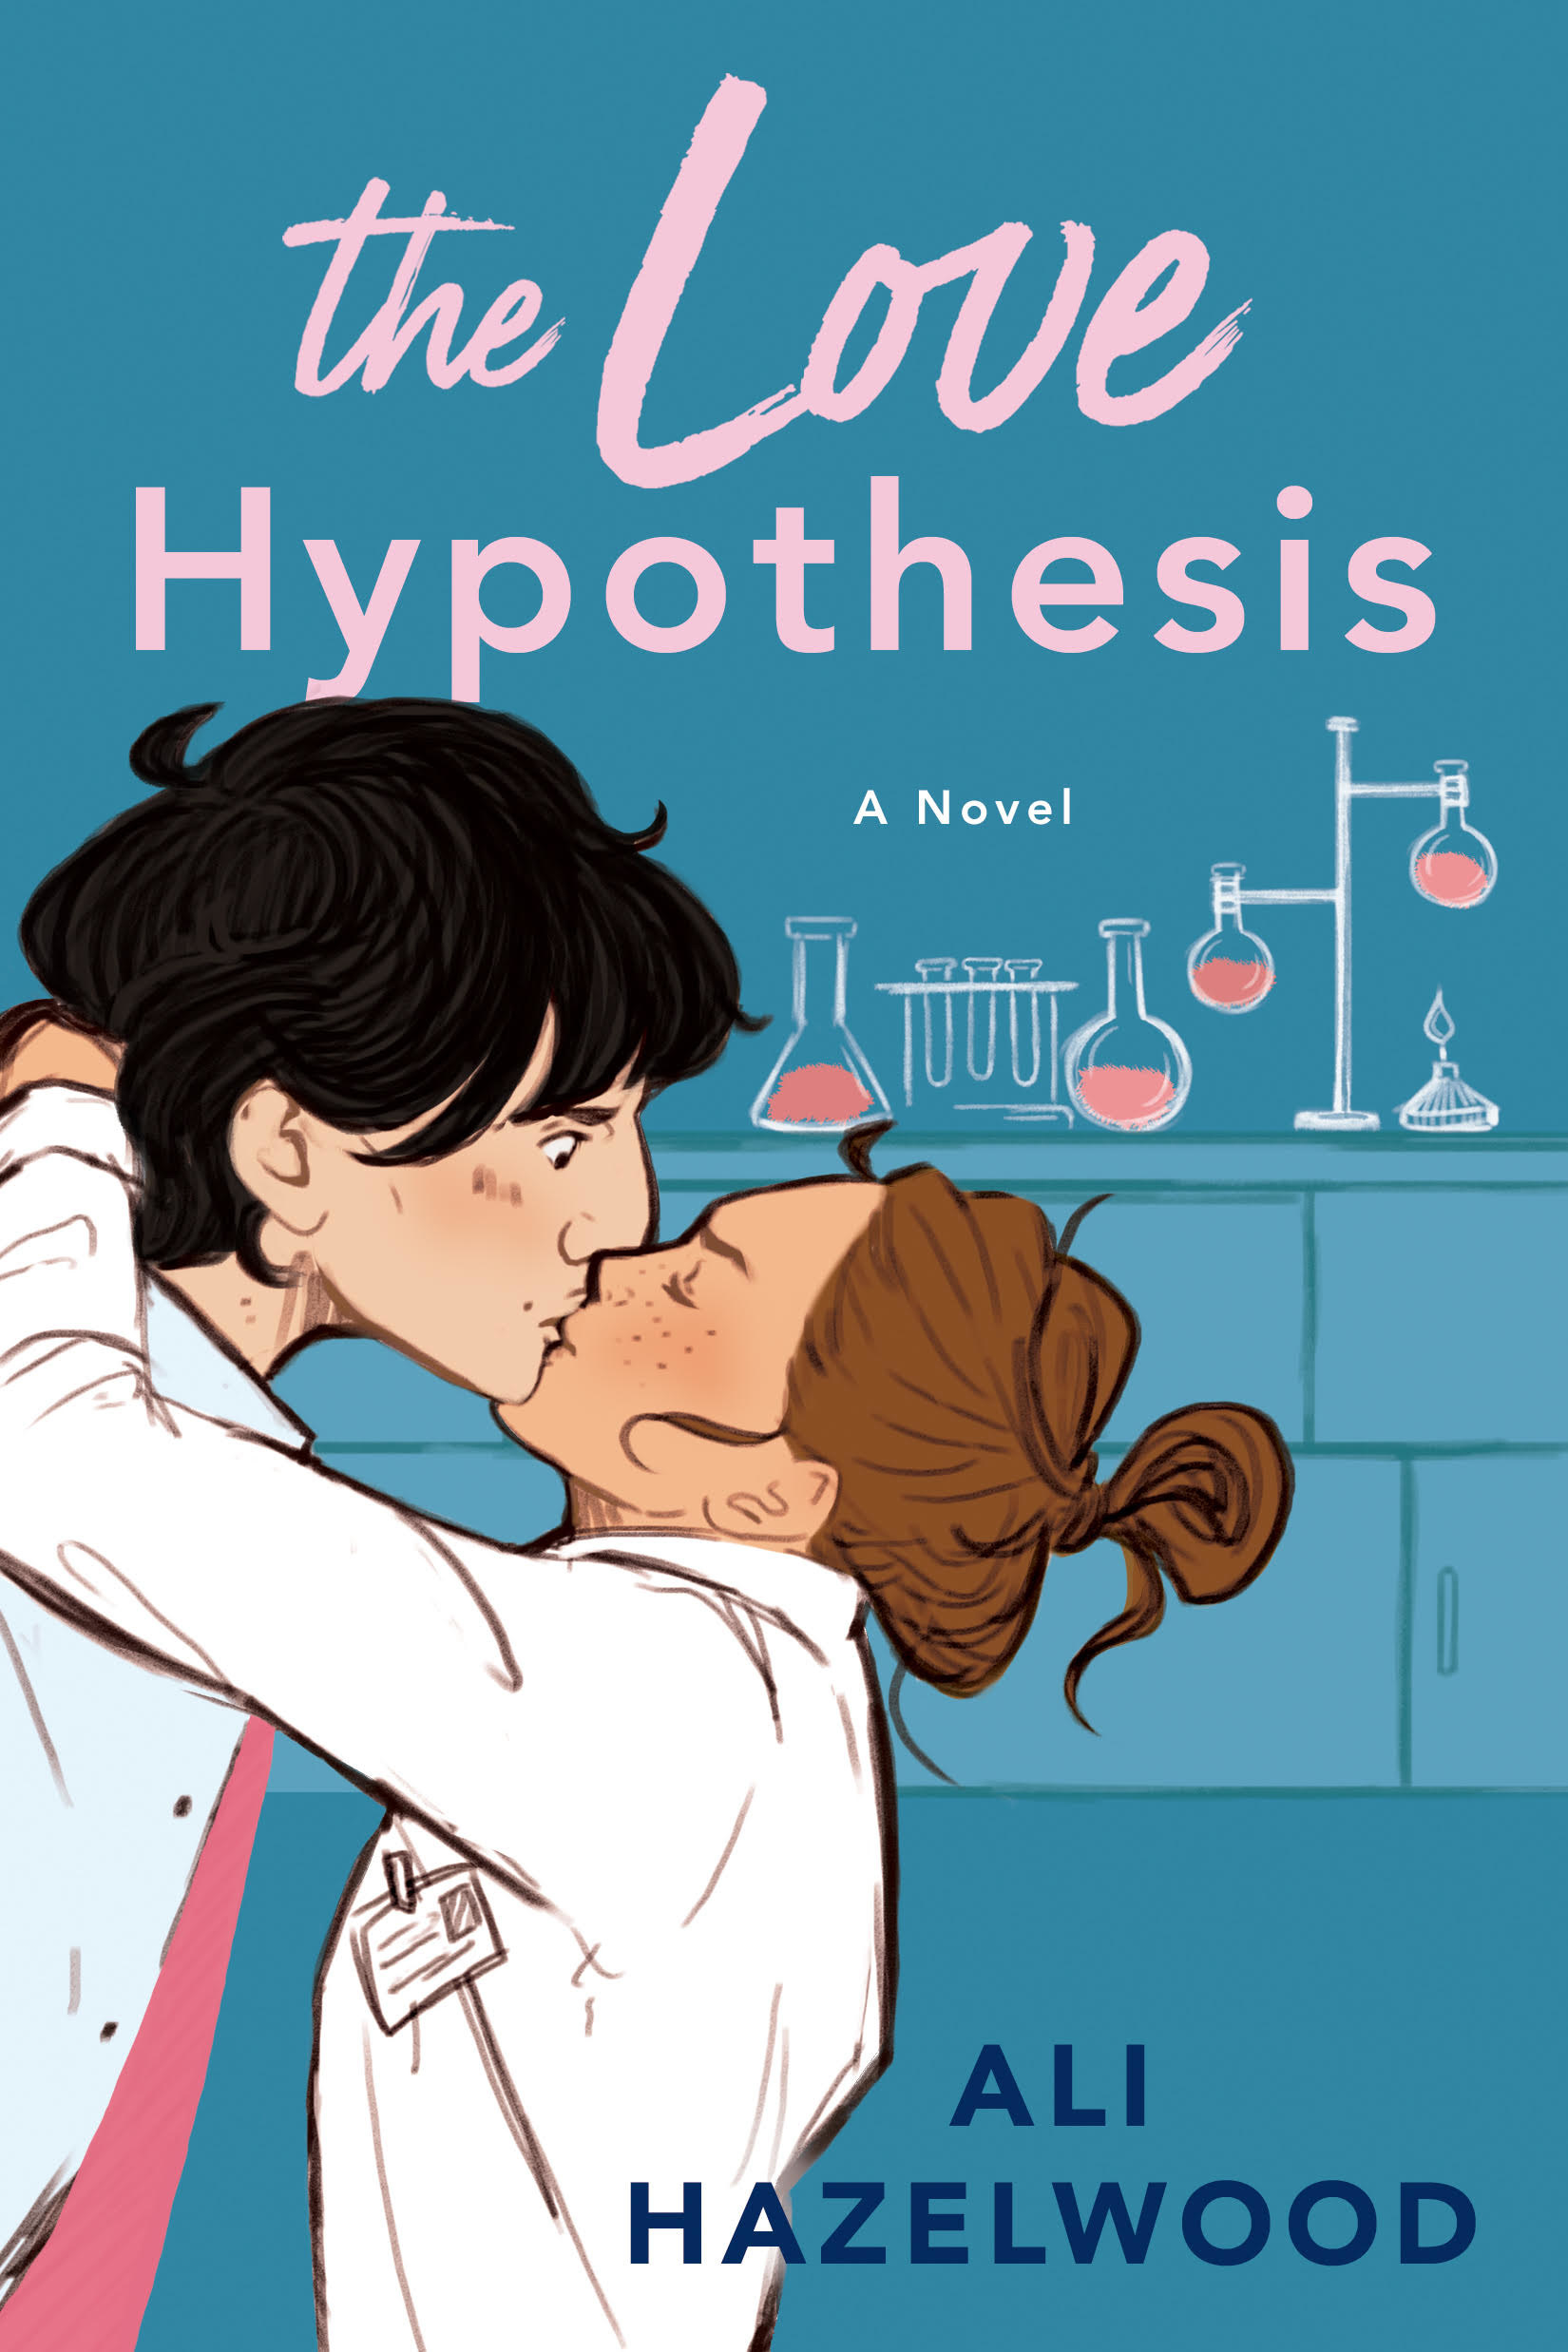 A surprised looking male scientist is kissed by a girl scientist with freckles in front of a chemistry lab backdrop.